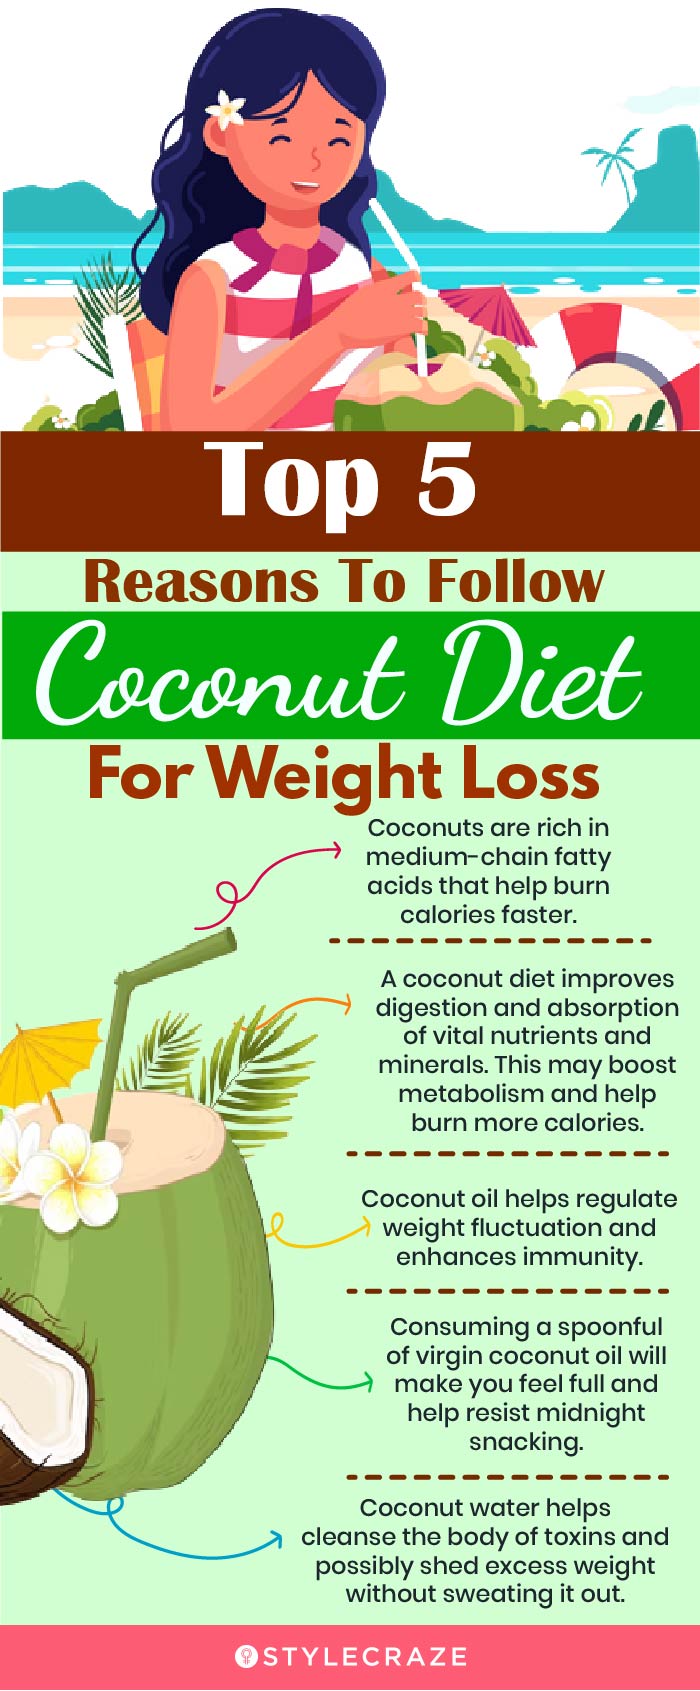 top 5 reasons to follow coconut diet for weight loss (infographic)